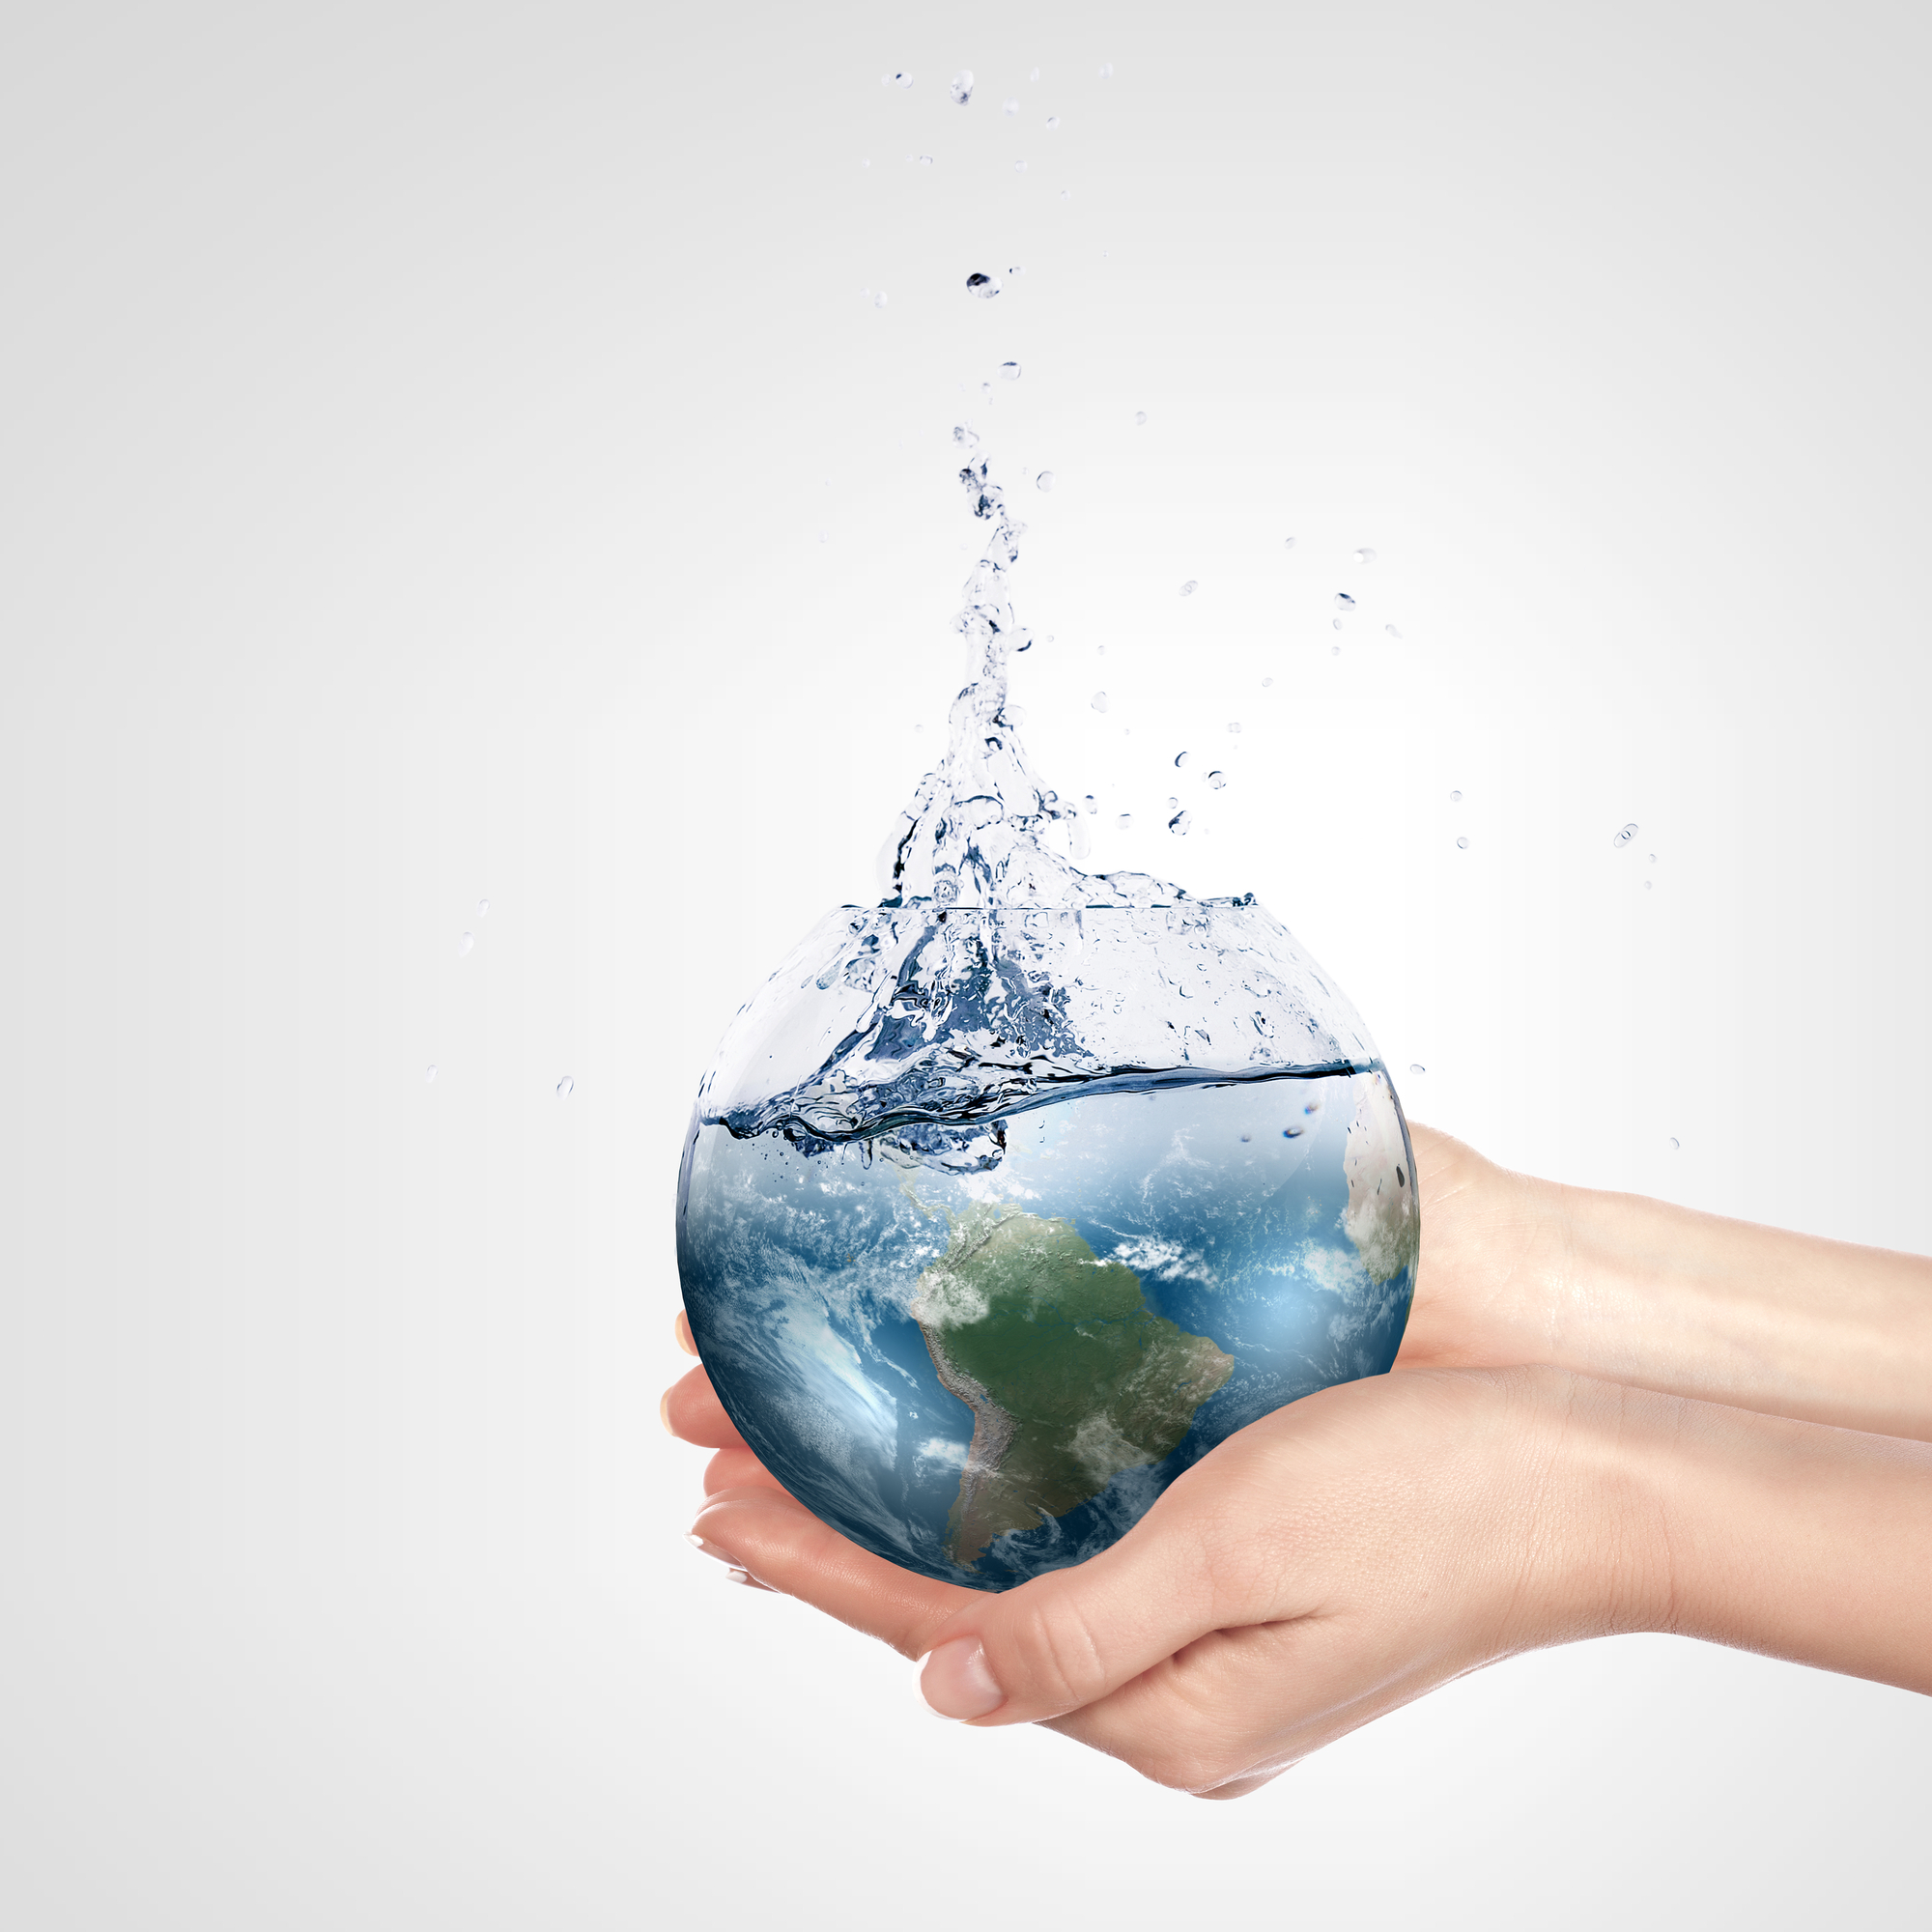 Image of hands holding globe that is filling the Earth with water